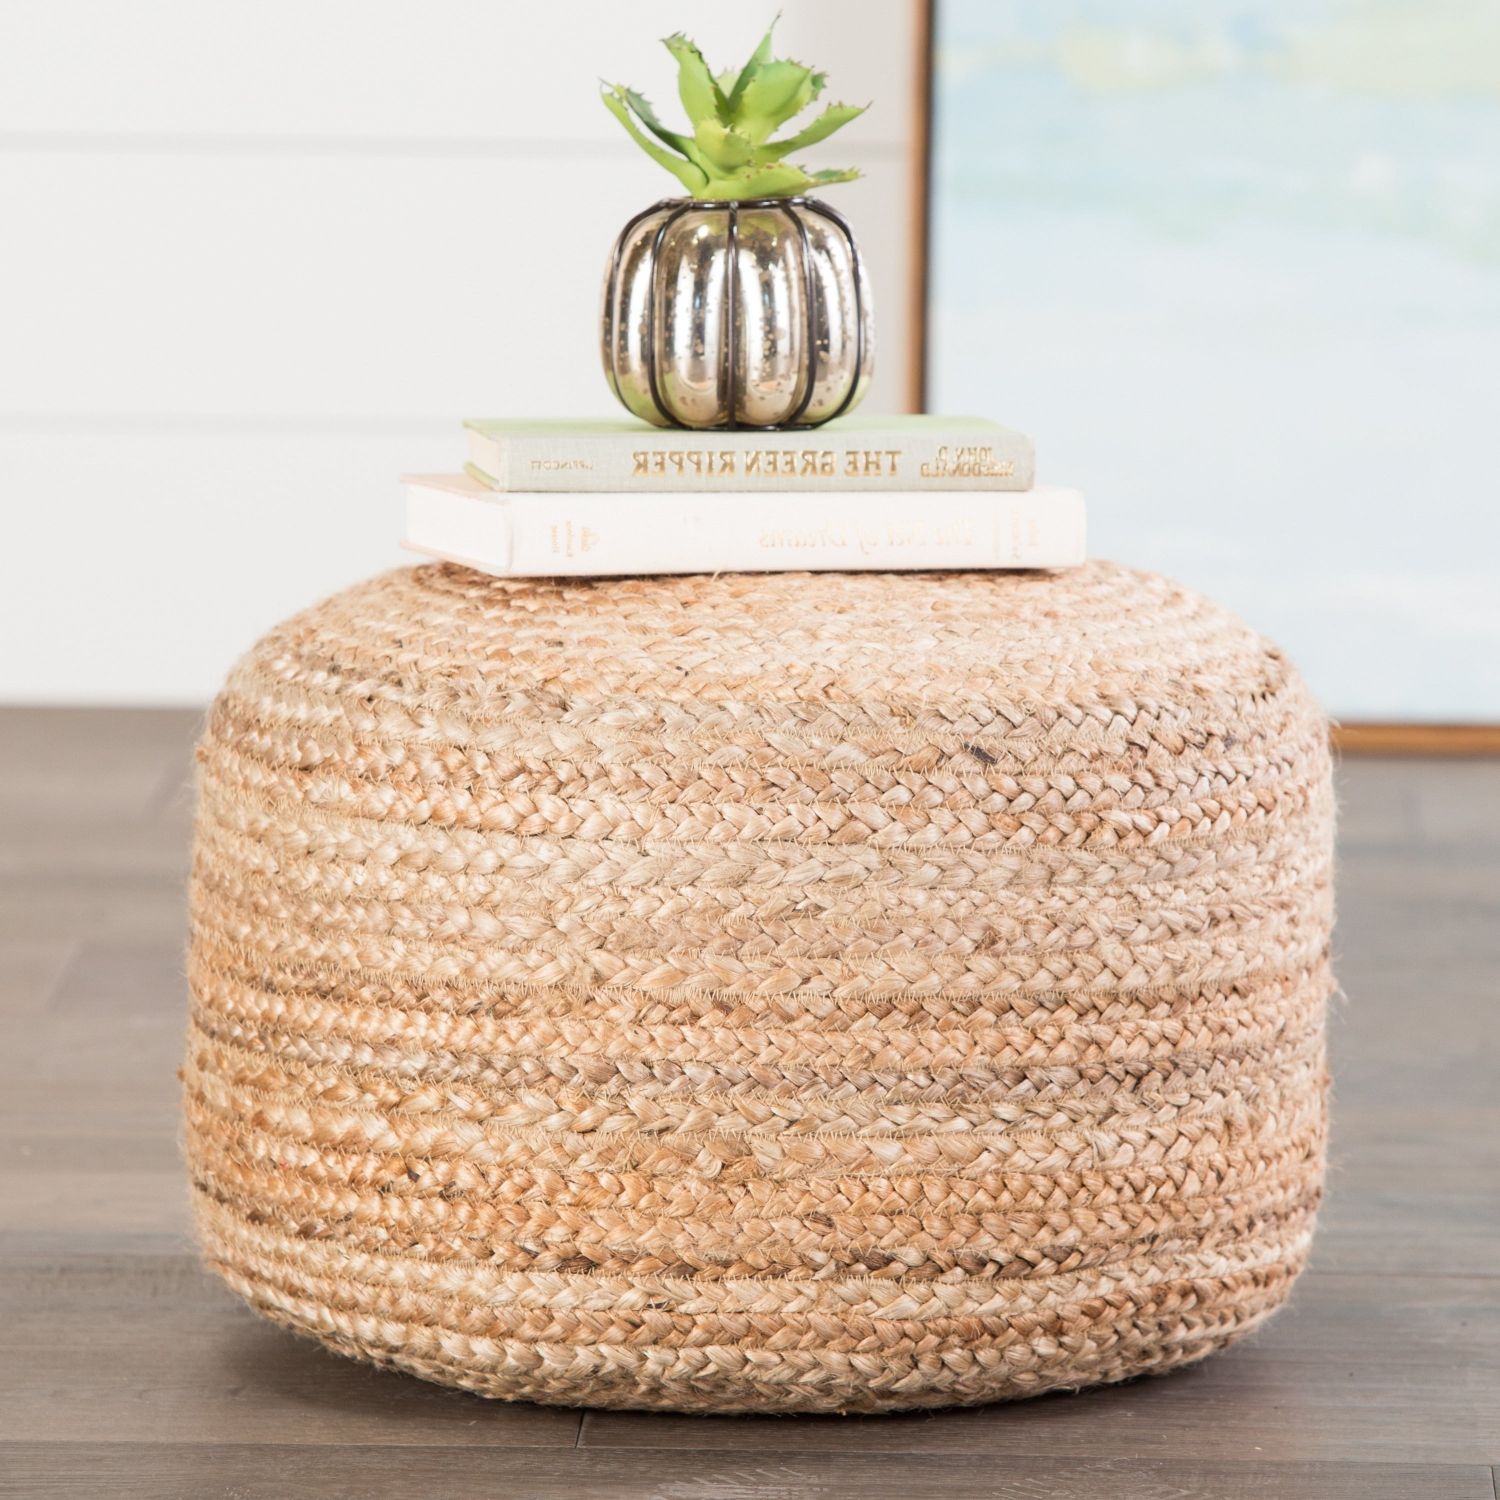 Round Natural Jute Pouf Tan Ottoman Cylindrical Footstool Braided Woven For 2019 Natural Fabric Square Ottomans (View 1 of 10)